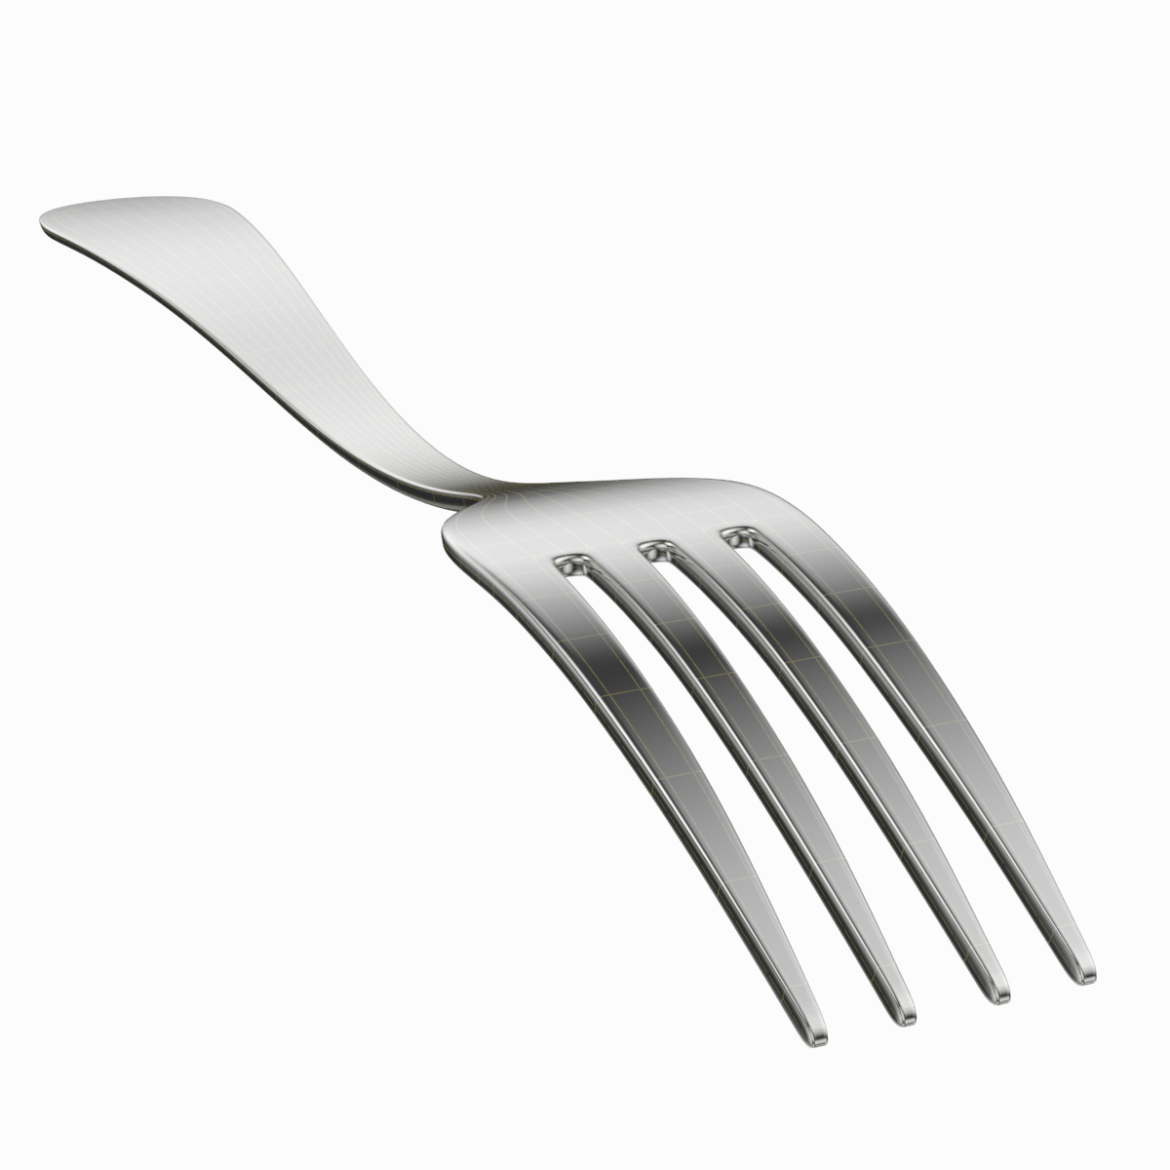  <a class="continue" href="https://www.flatpyramid.com/3d-models/furniture-3d-models/cookware-and-tableware/utensils/common-cutlery-set-7-pieces/">Continue Reading<span> Common Cutlery Set 7 Pieces</span></a>